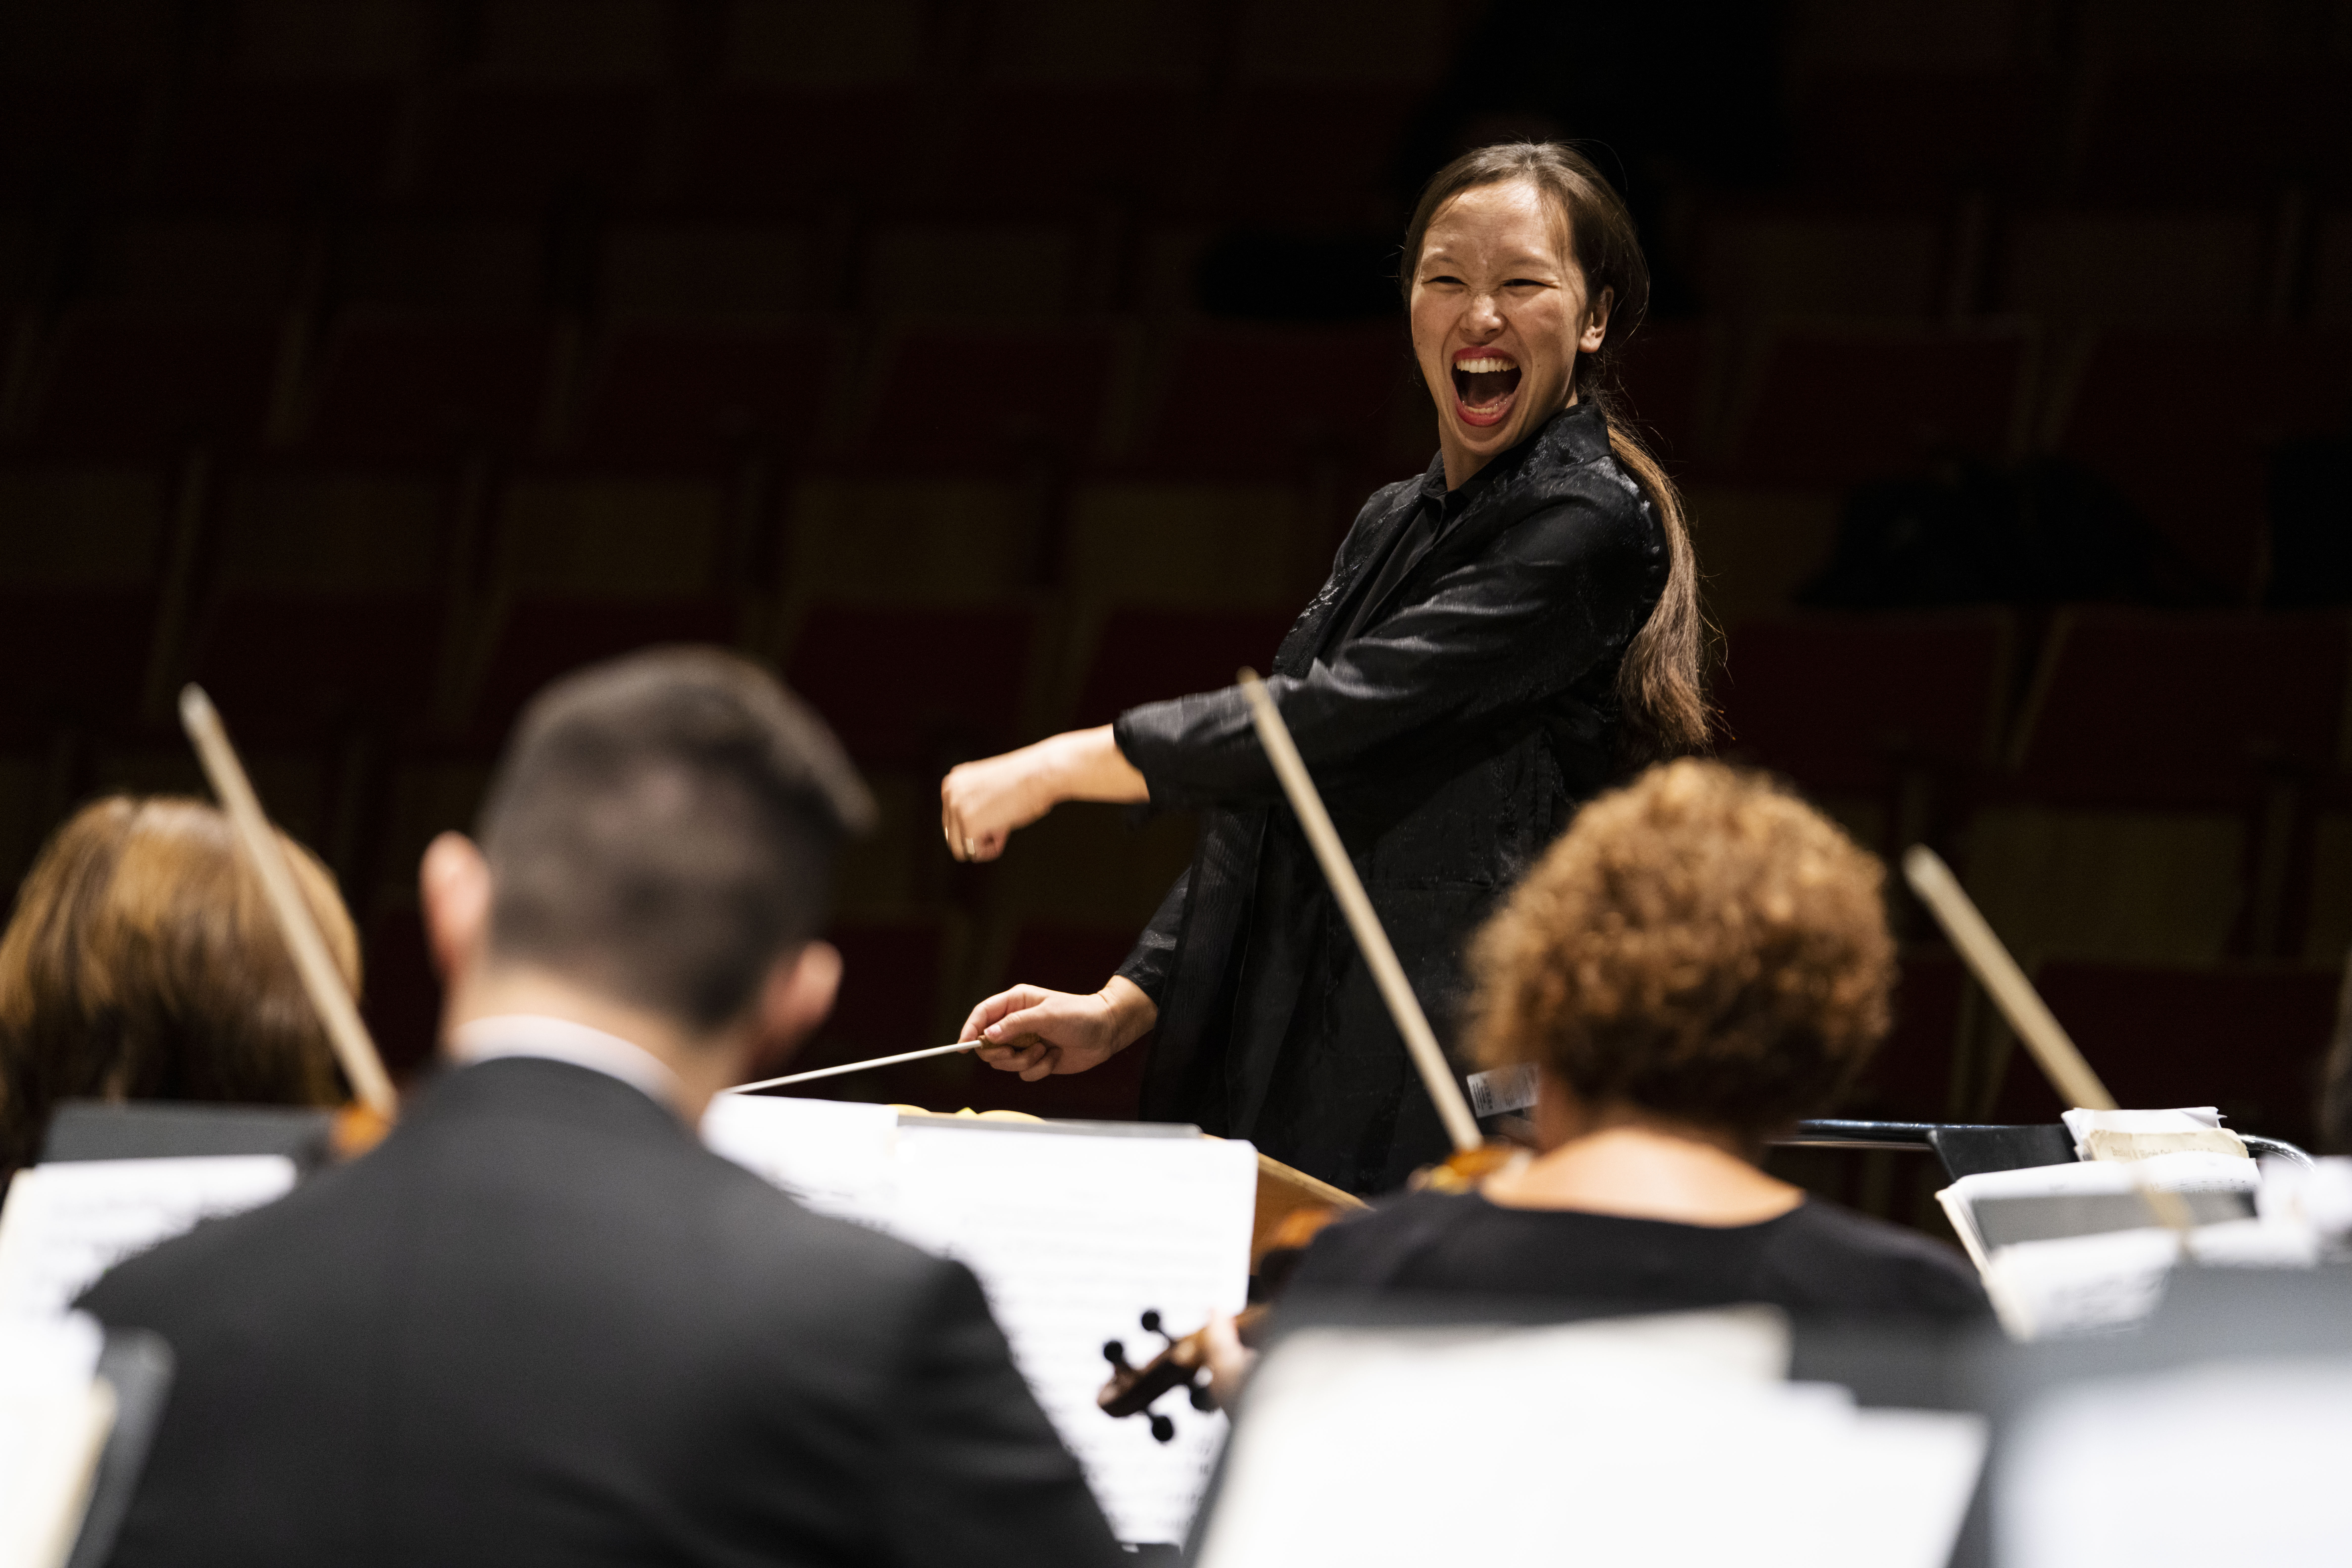 Conductor Naomi Woo emphatically leading an orchestra